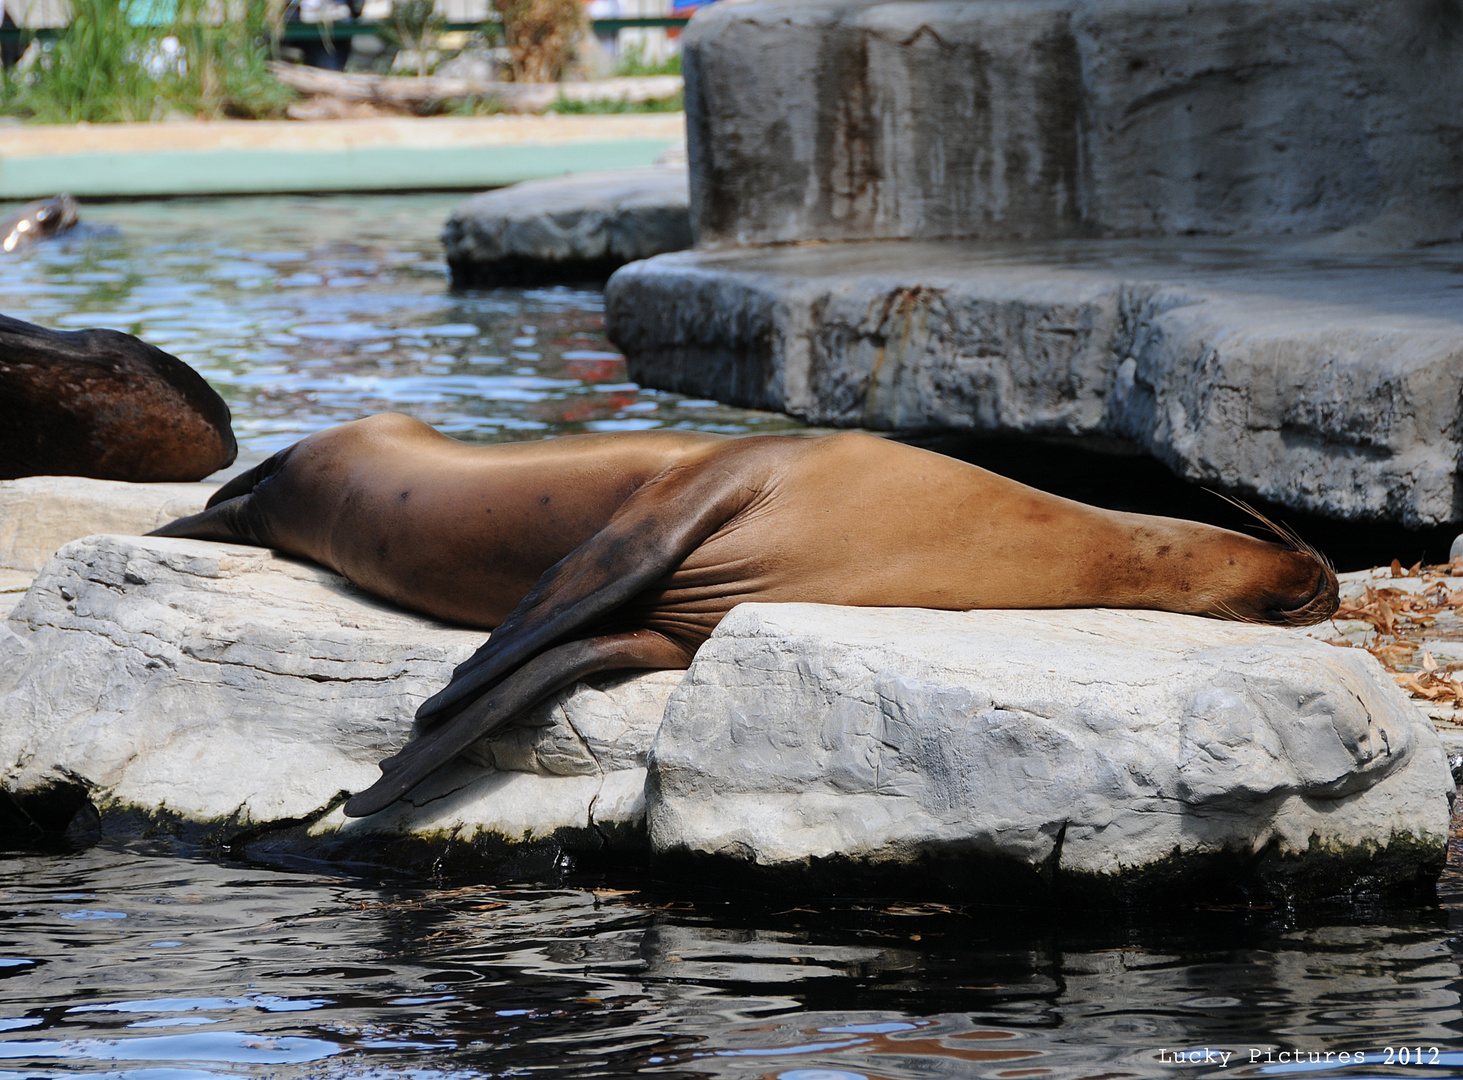 Relax - at the Zoo